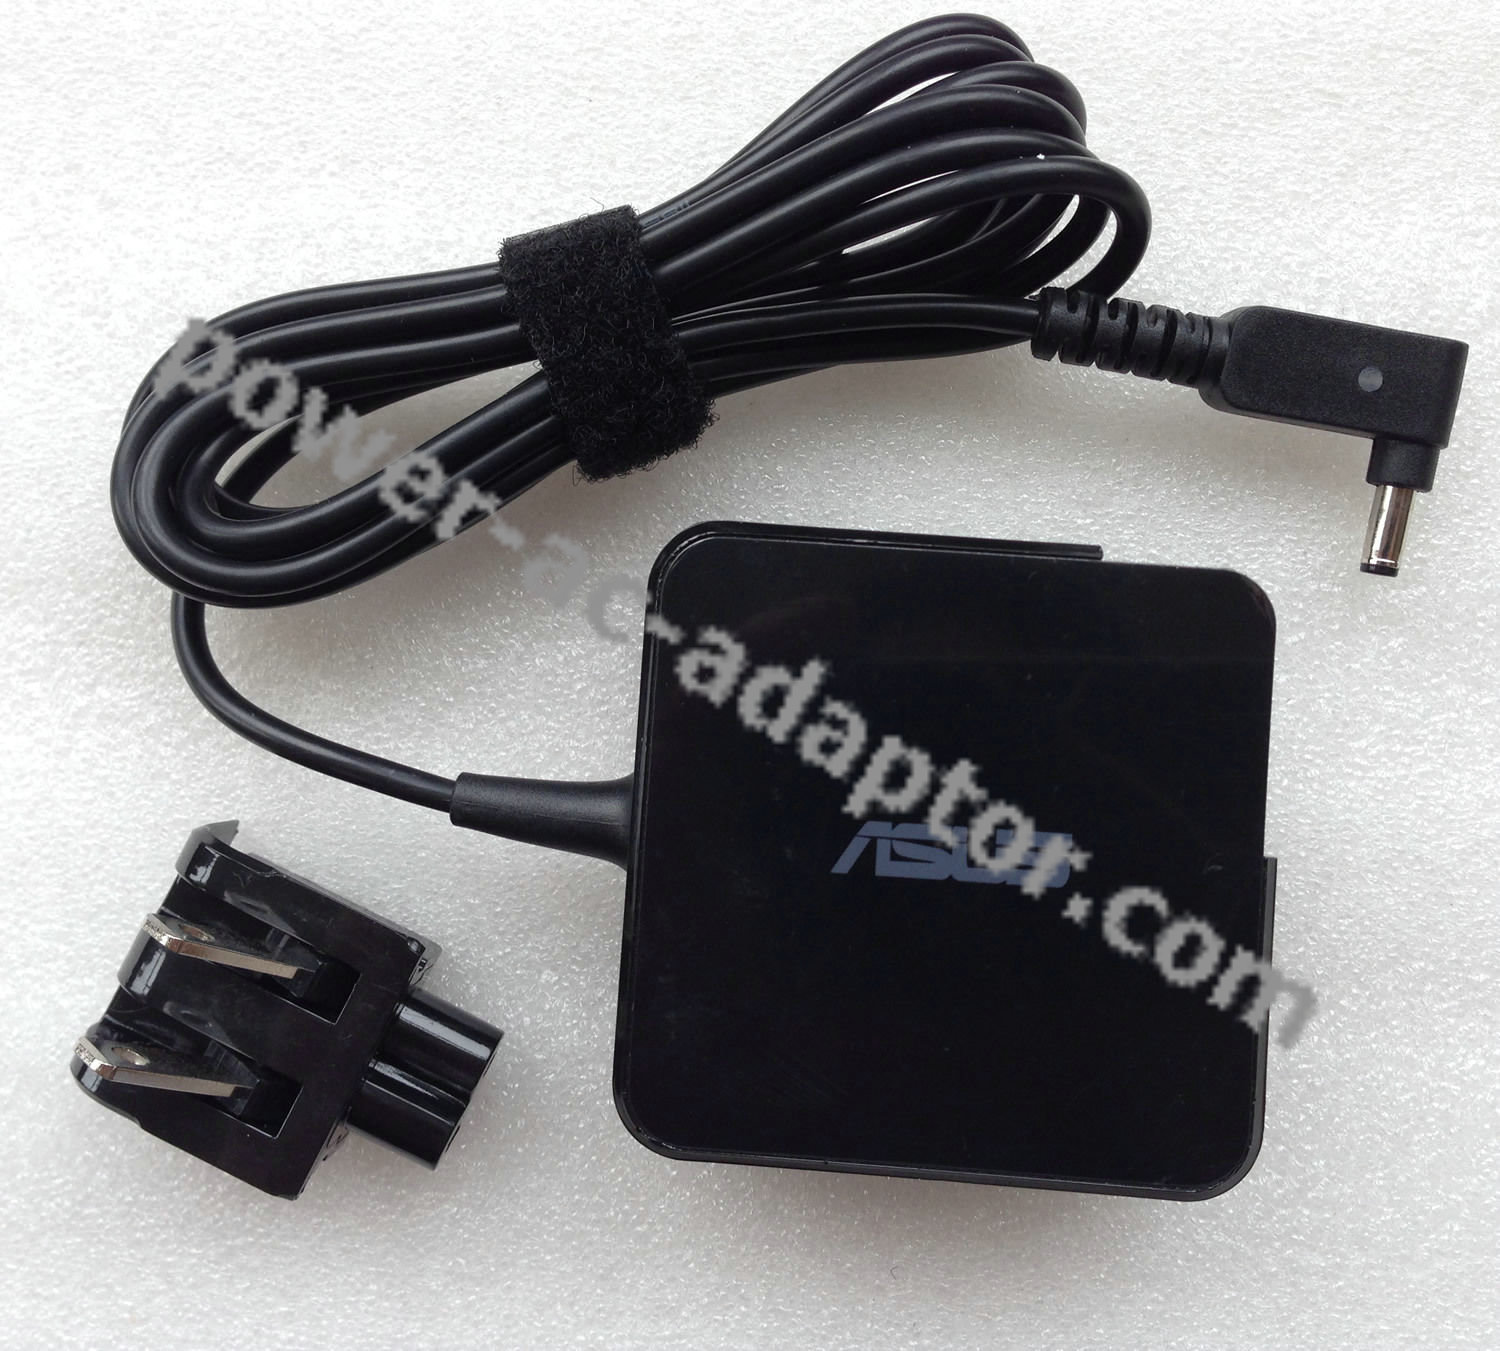 ASUS 33W AC Power Adapter for Asus X553MA-XX057D Notebook